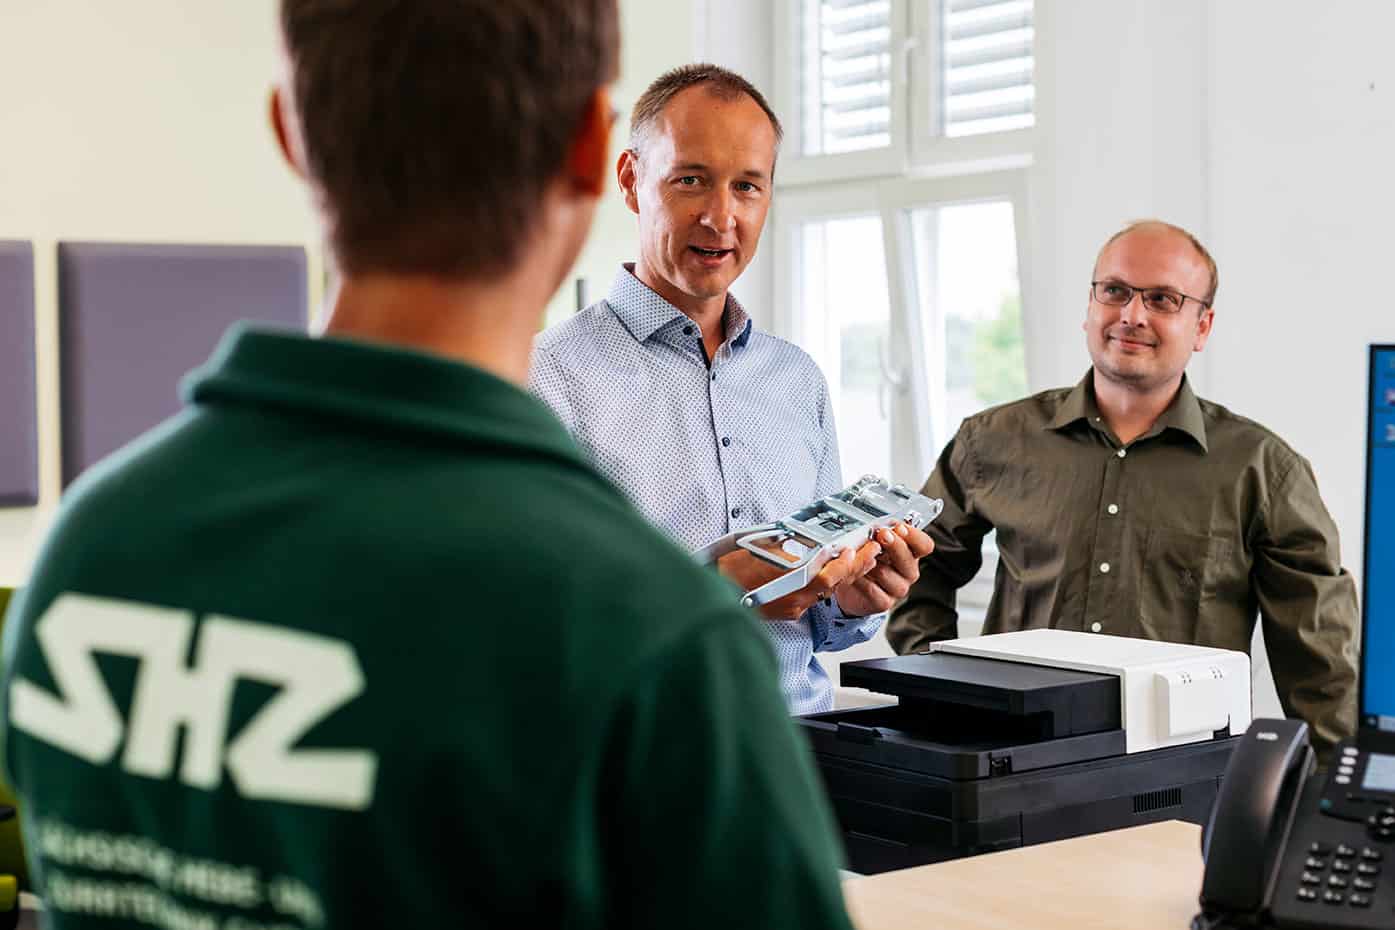 An interview with SHZ GmbH employees